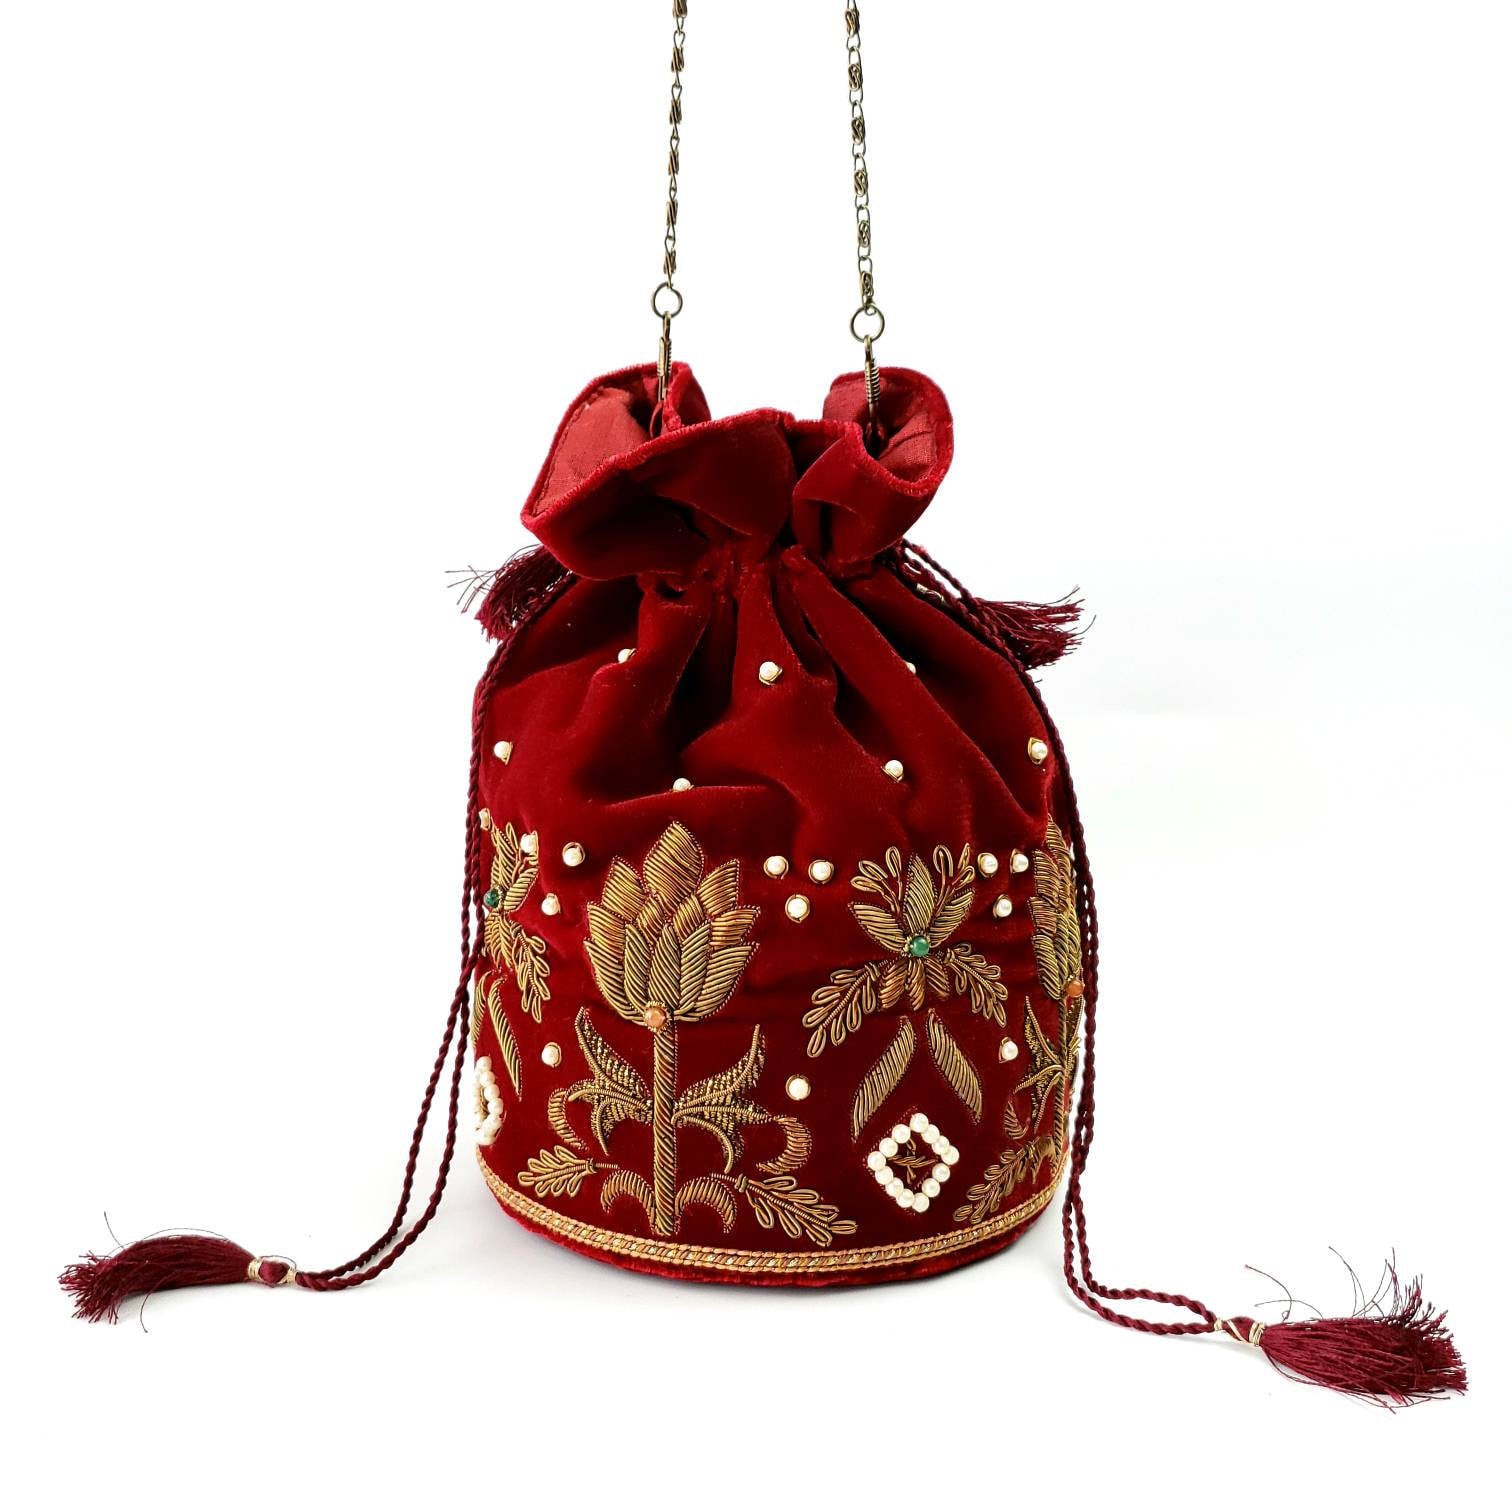 Buy Elegant Fancy Potli Bags for All Occasions - The Tan Clan